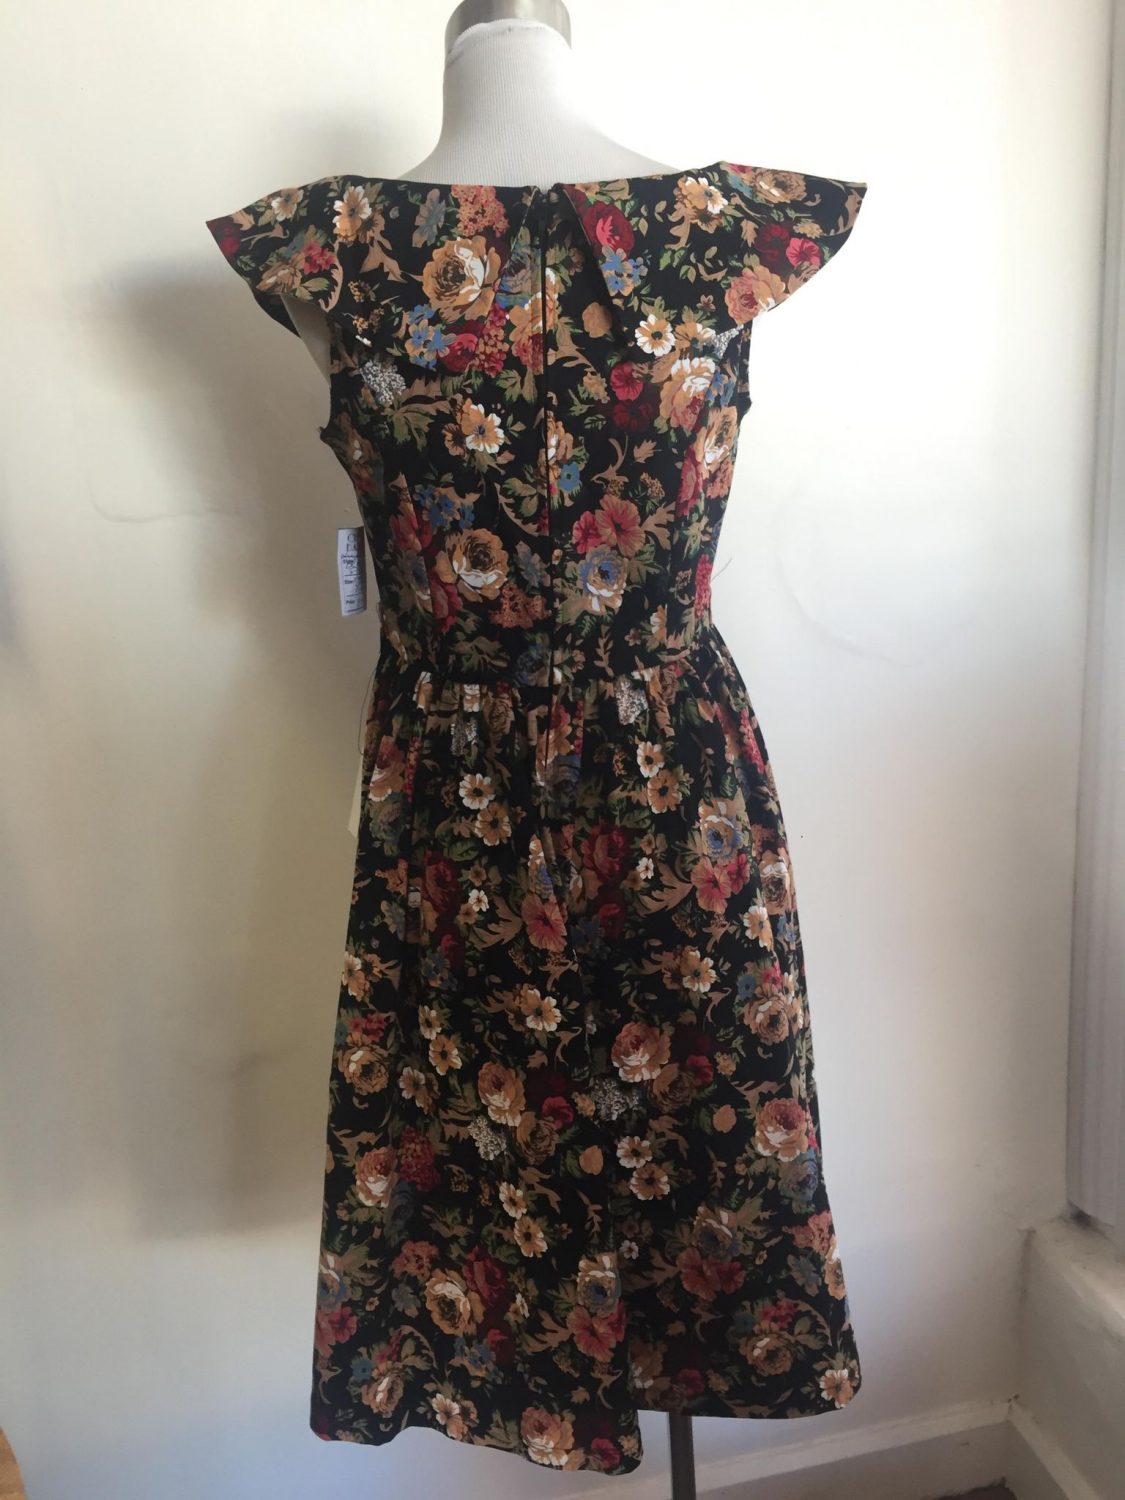 INDY BOP 1950S STYLE BLACK AND FLORAL COLLAR DRESS | Chaos Bazaar Vintage